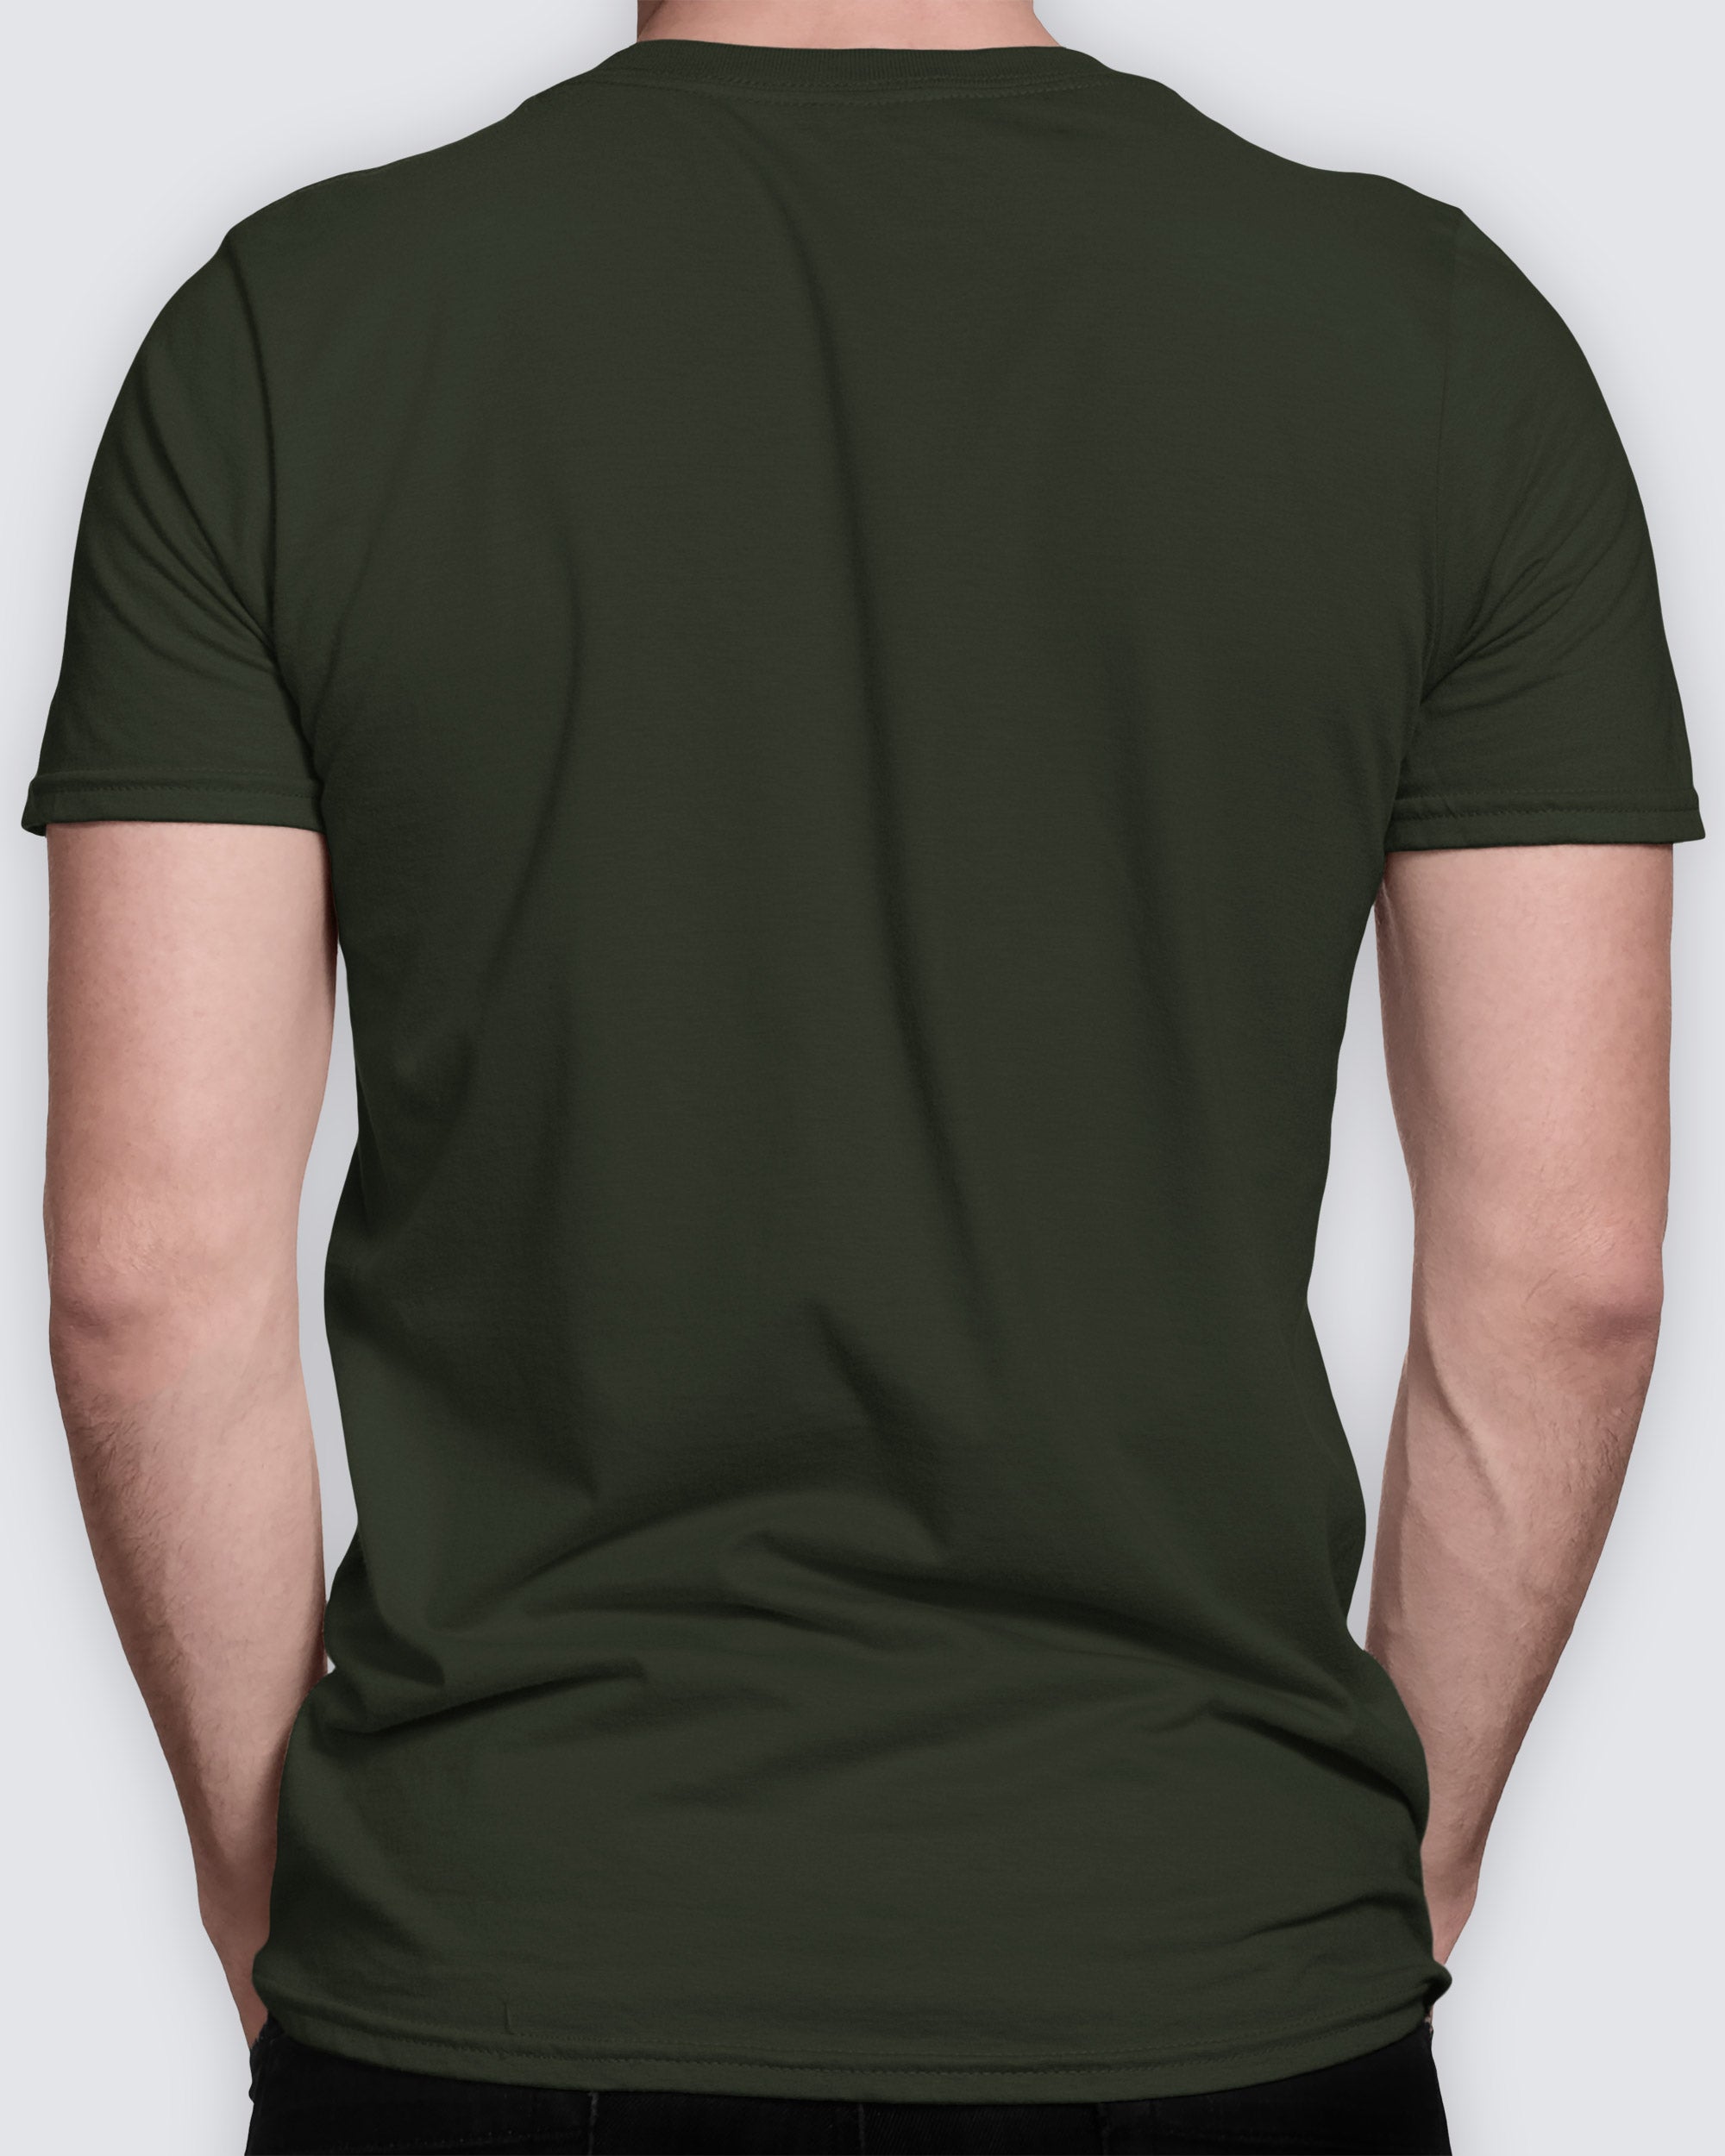 Fly Fishing T-Shirt | Wild Salmon Forest Green - Capsize Fly Fishing